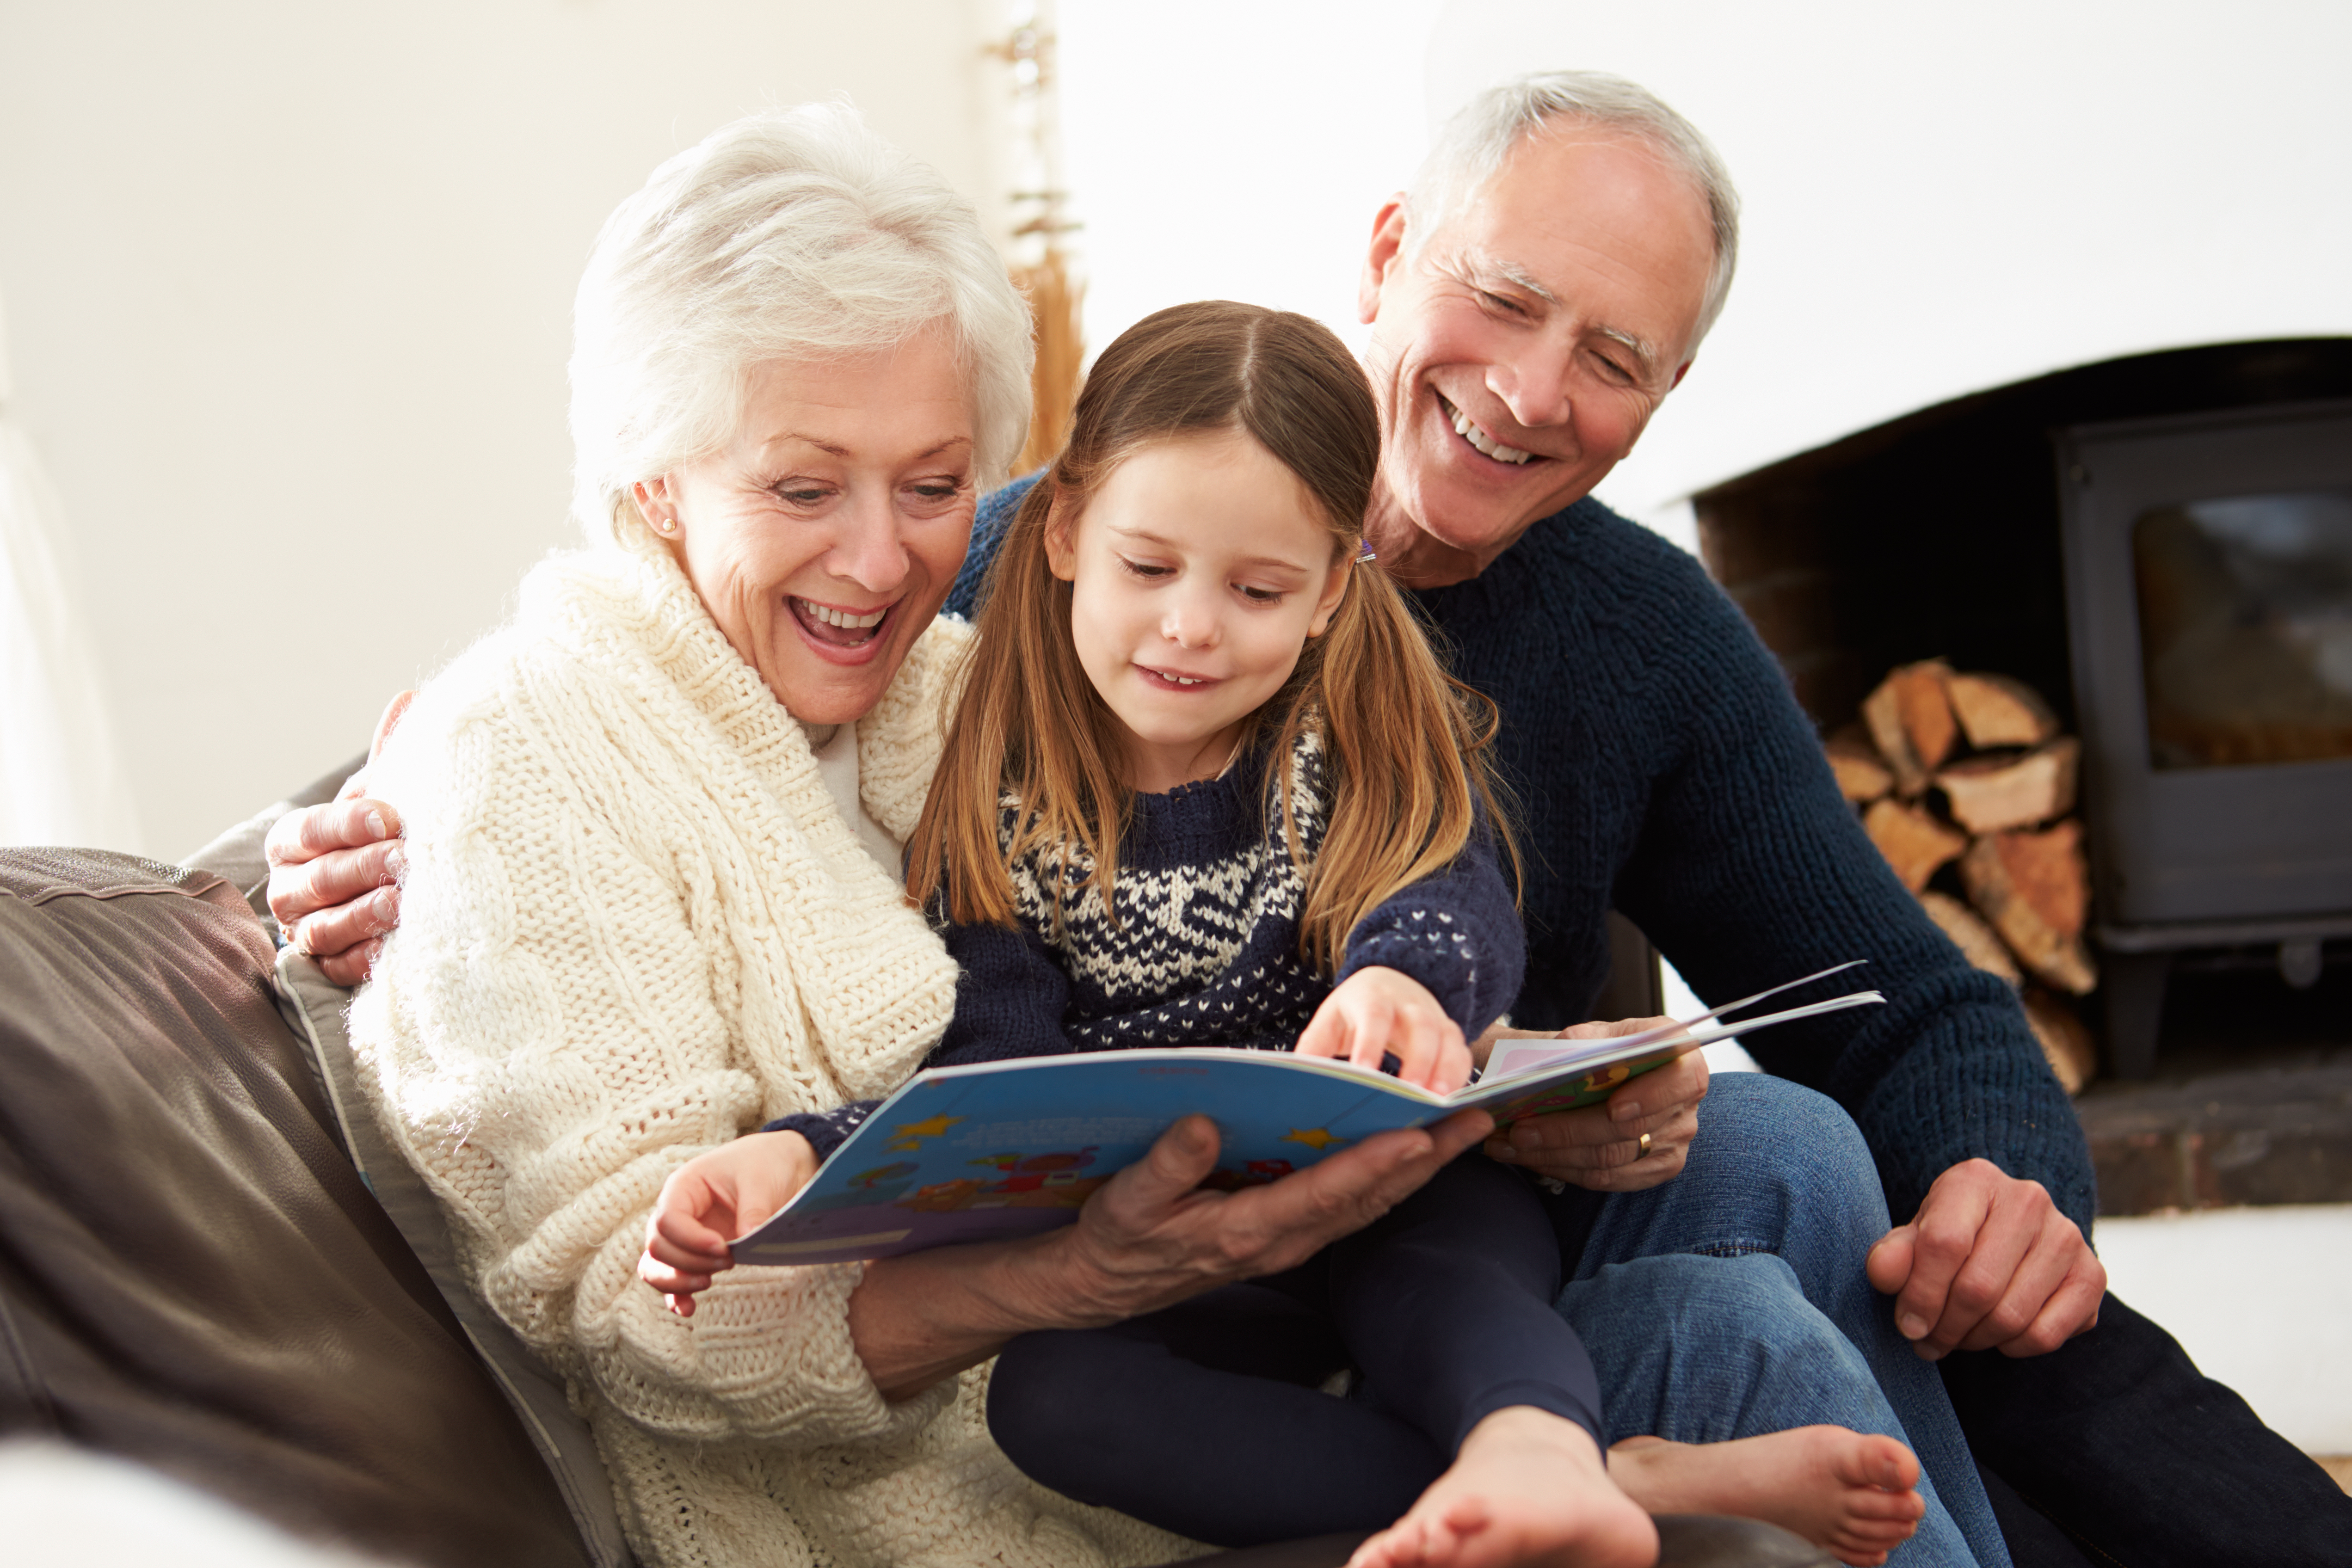 Grandparents reading a book to their granddaughter | Source: Shutterstock